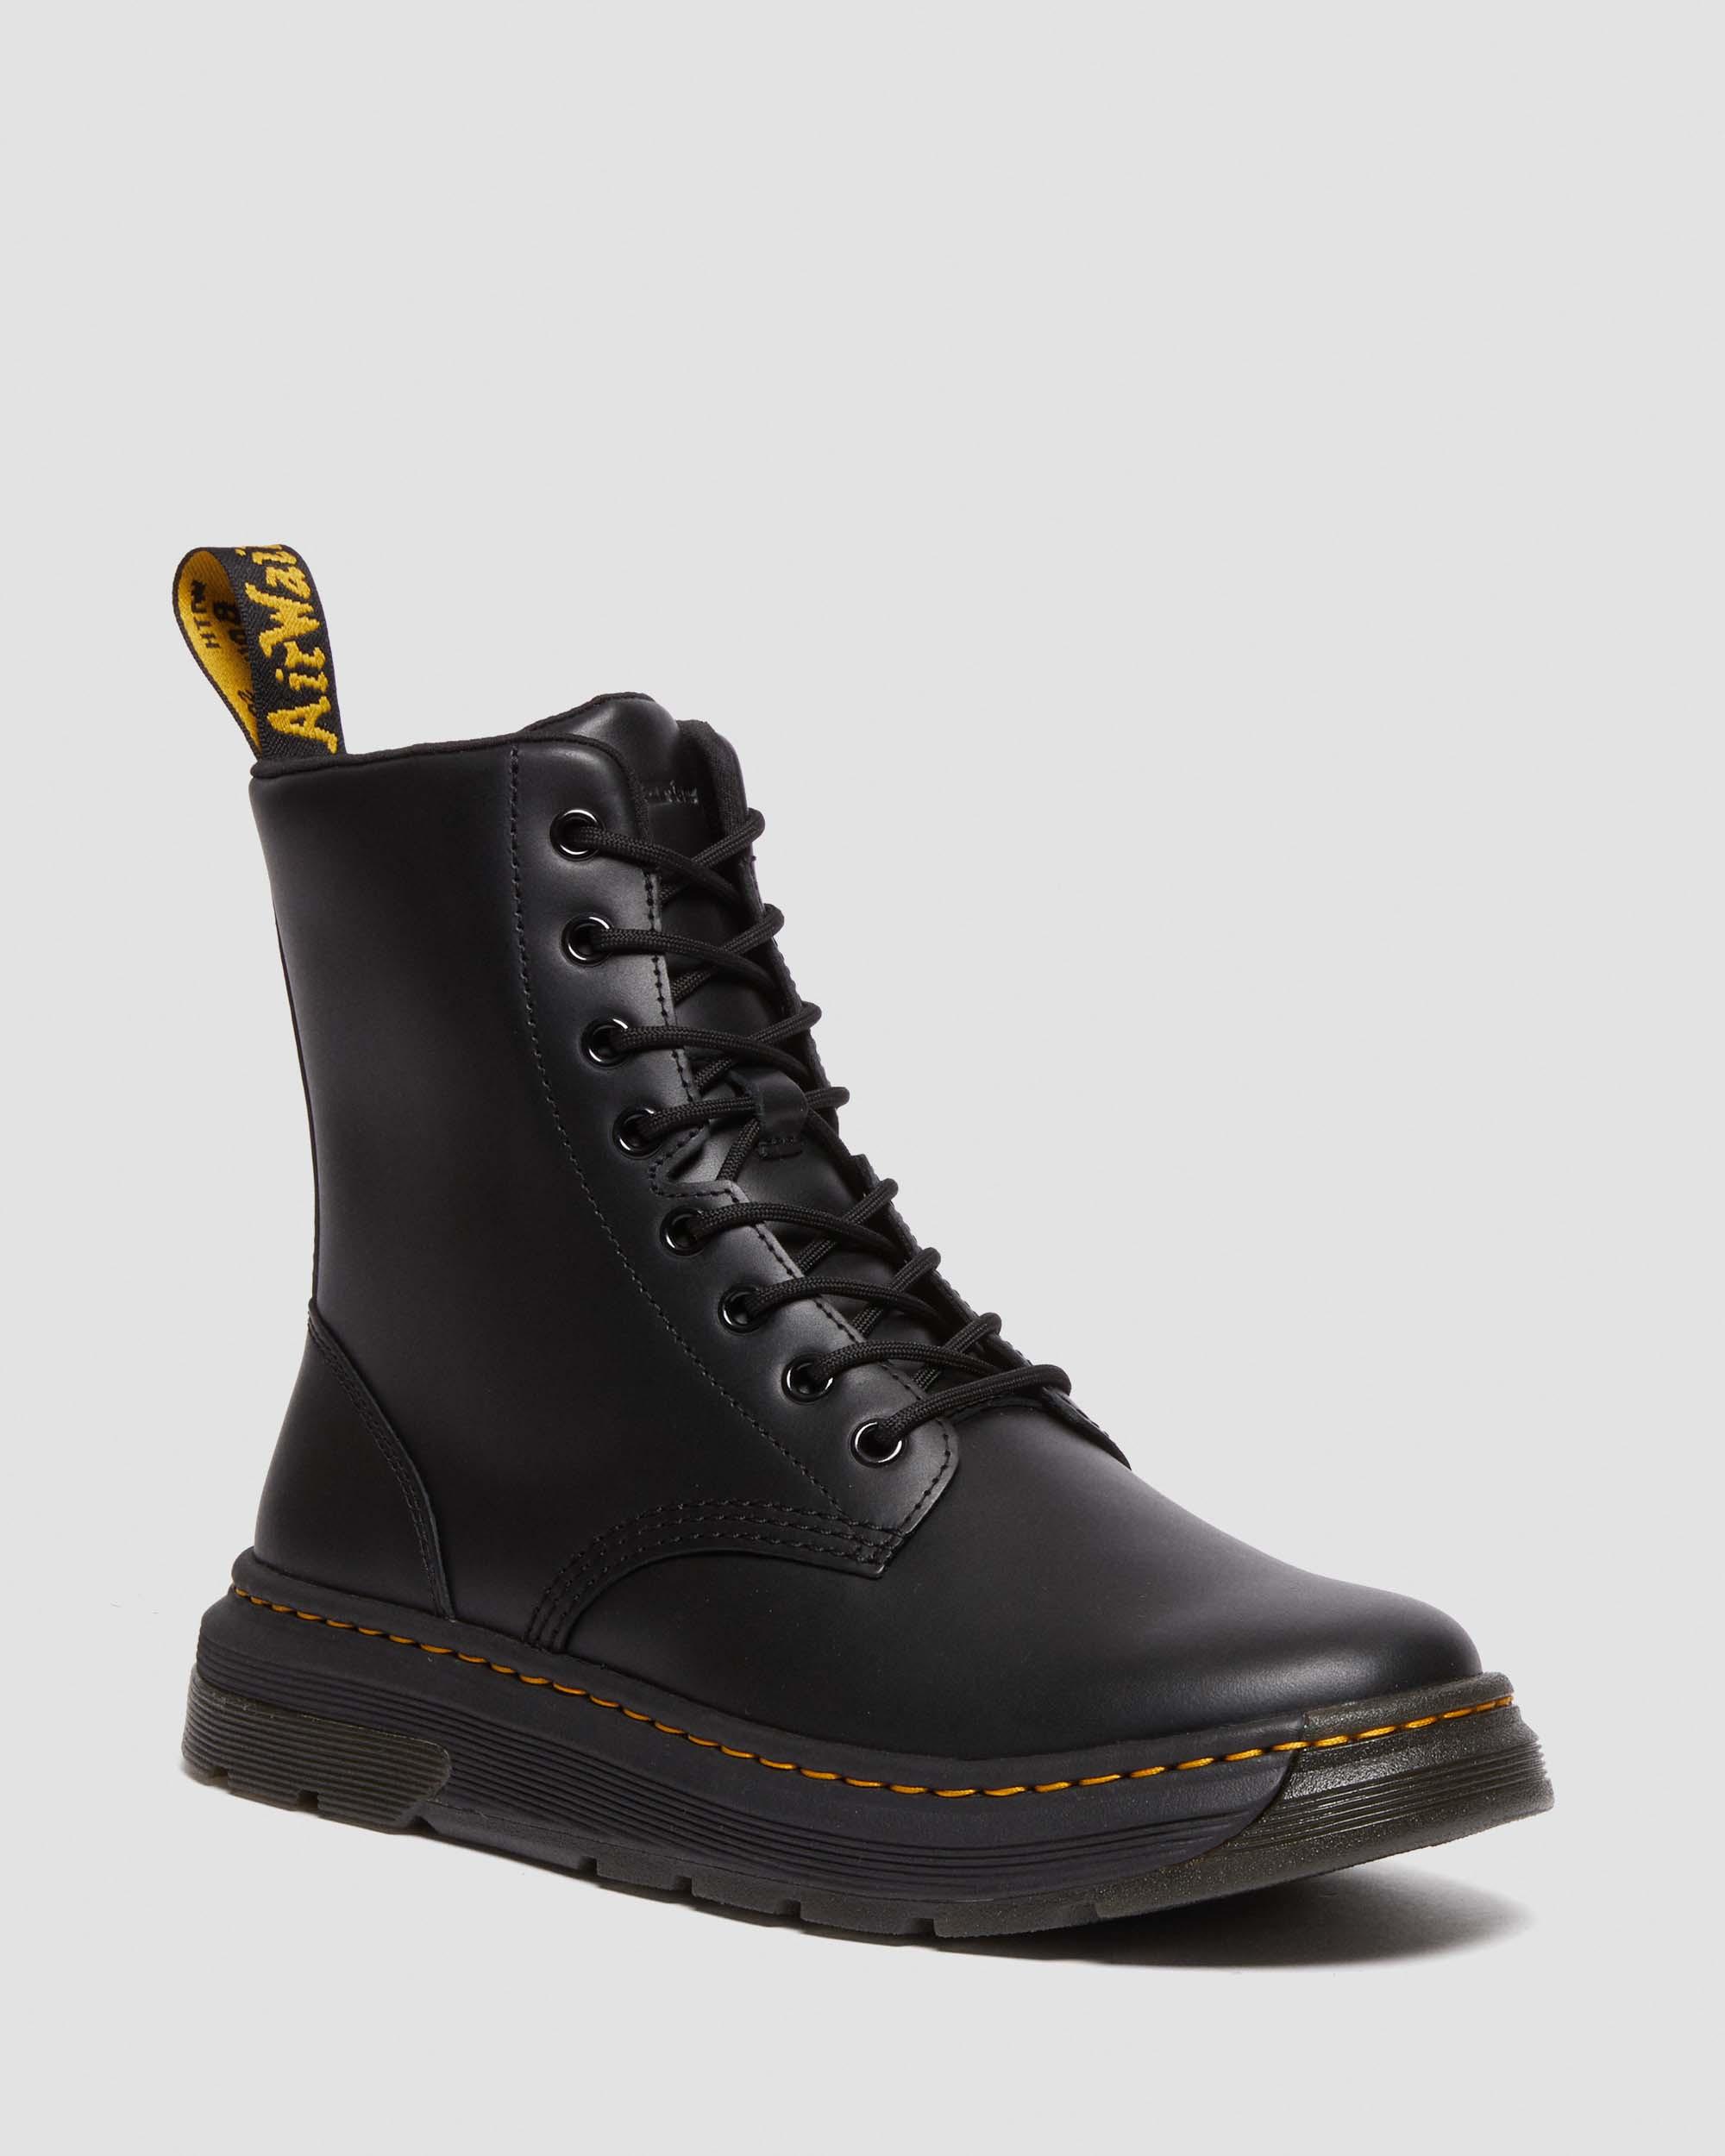 Crewson Leather Lace Up Boots in BLACK